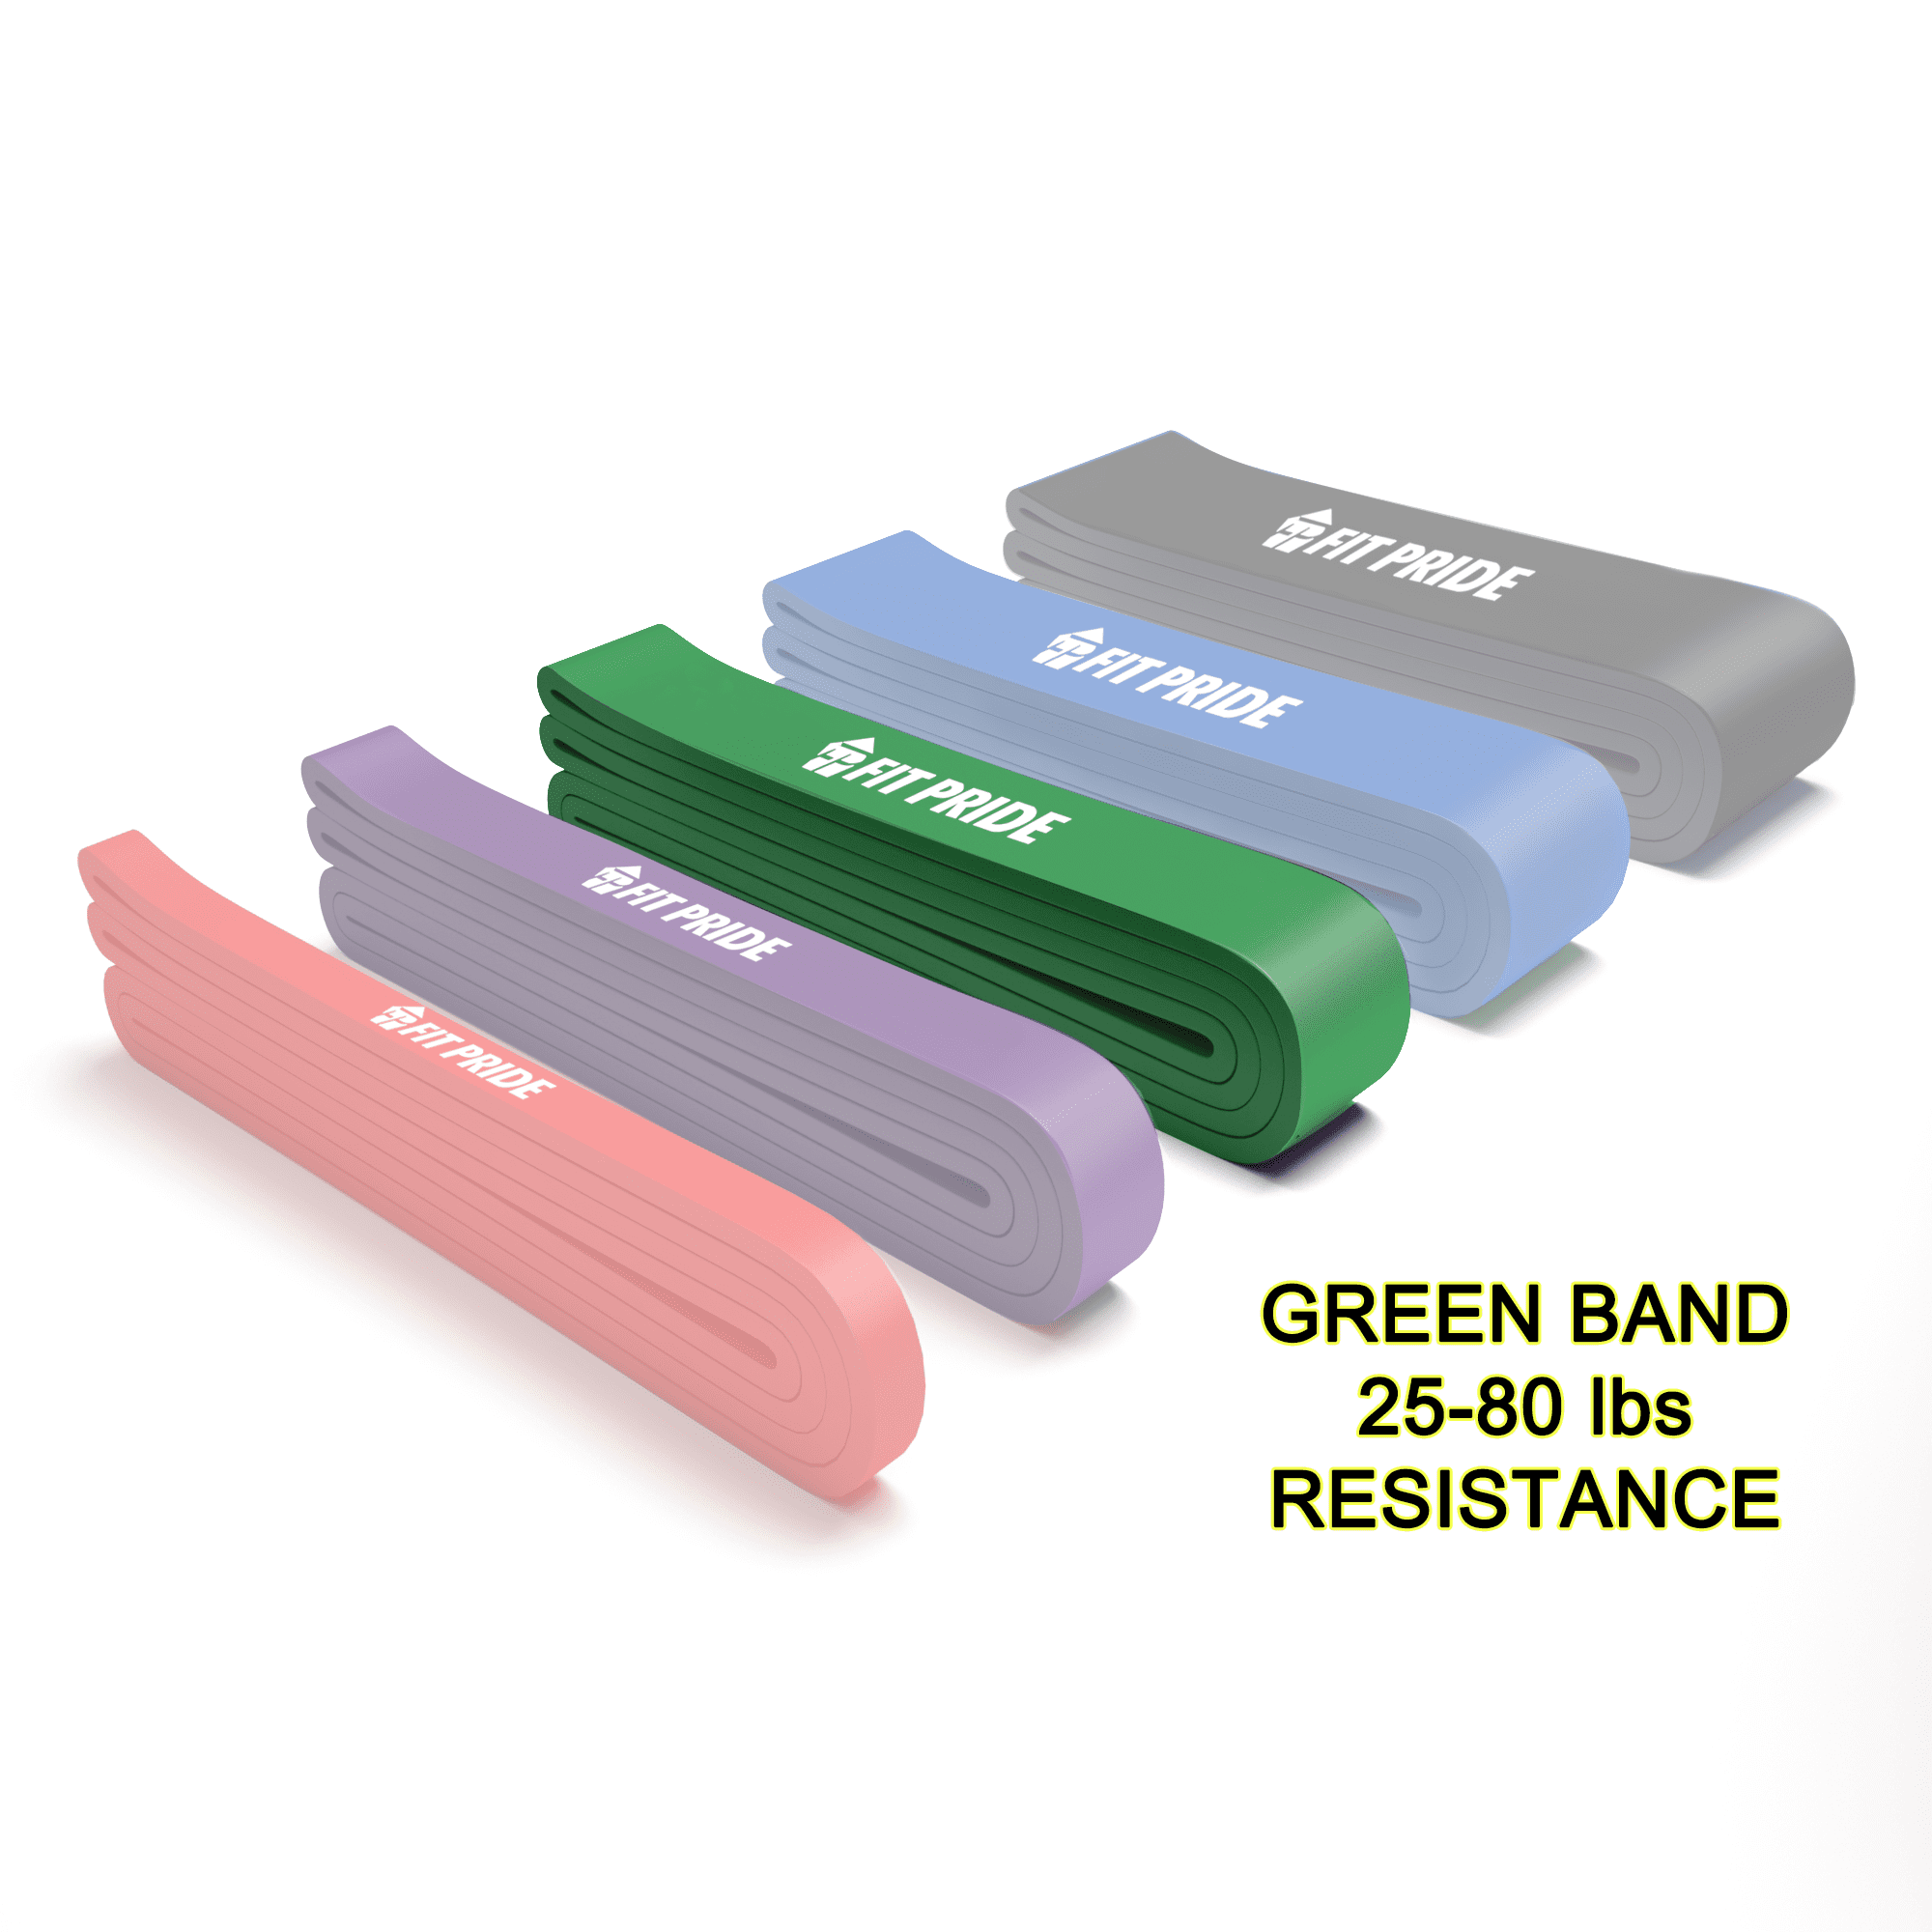 Heavy Duty Resistance Band Mobility & Powerlifting Exercise Bands with eGuide 